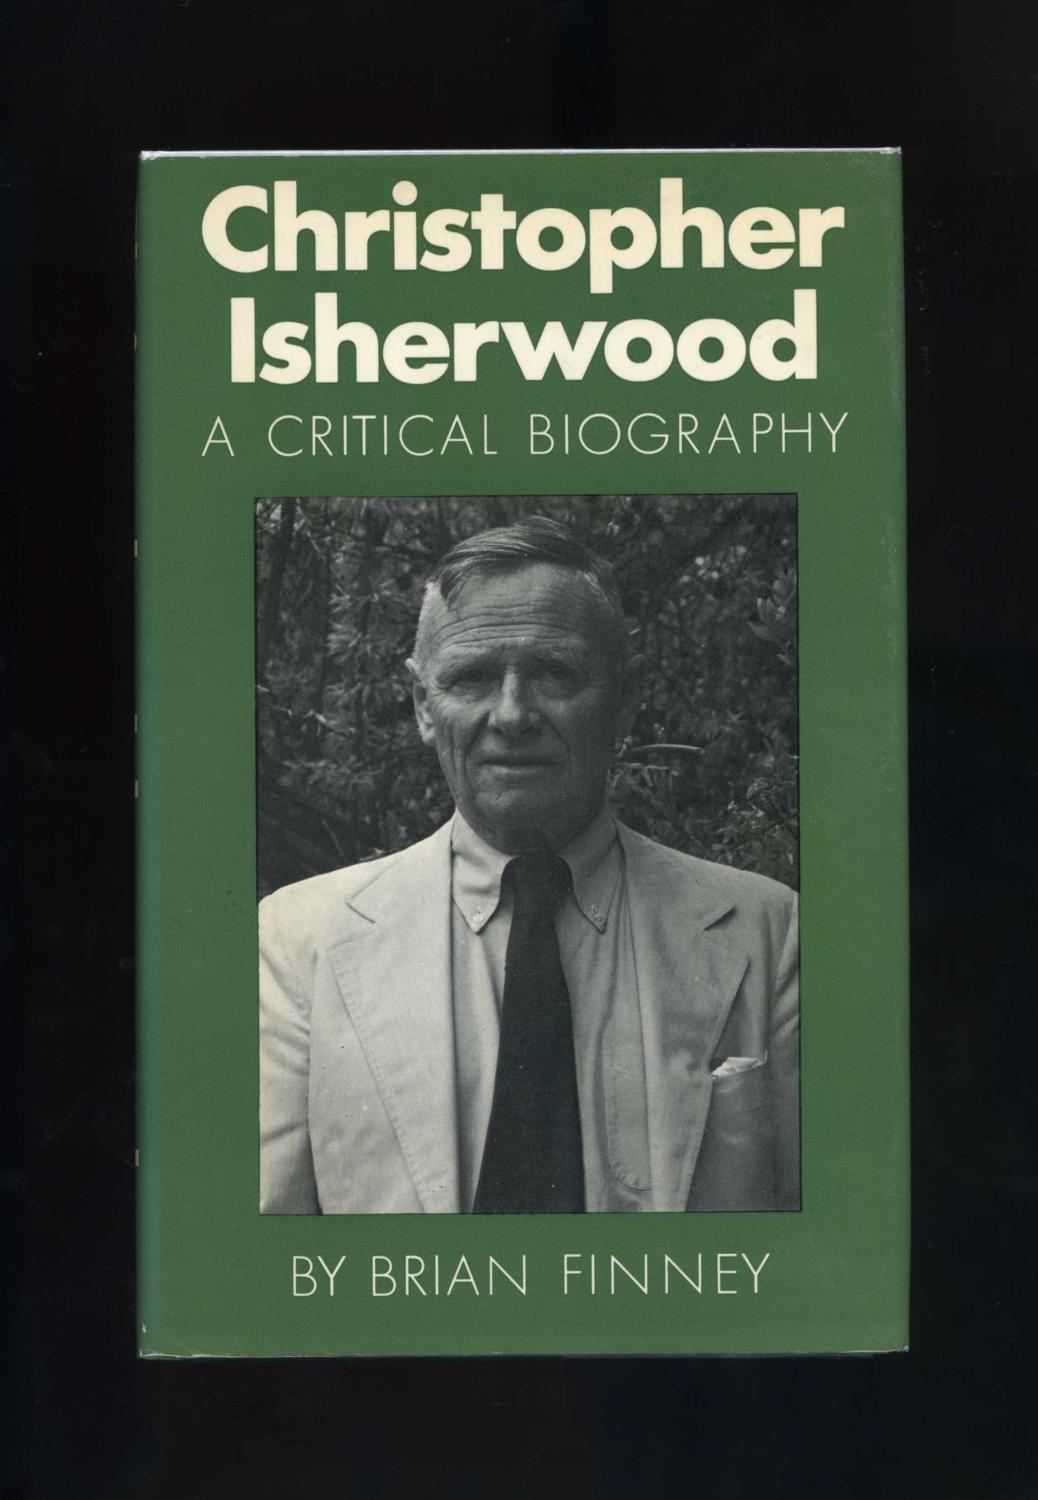 CHRISTOPHER ISHERWOOD: A CRITICAL BIOGRAPHY - Brian Finney